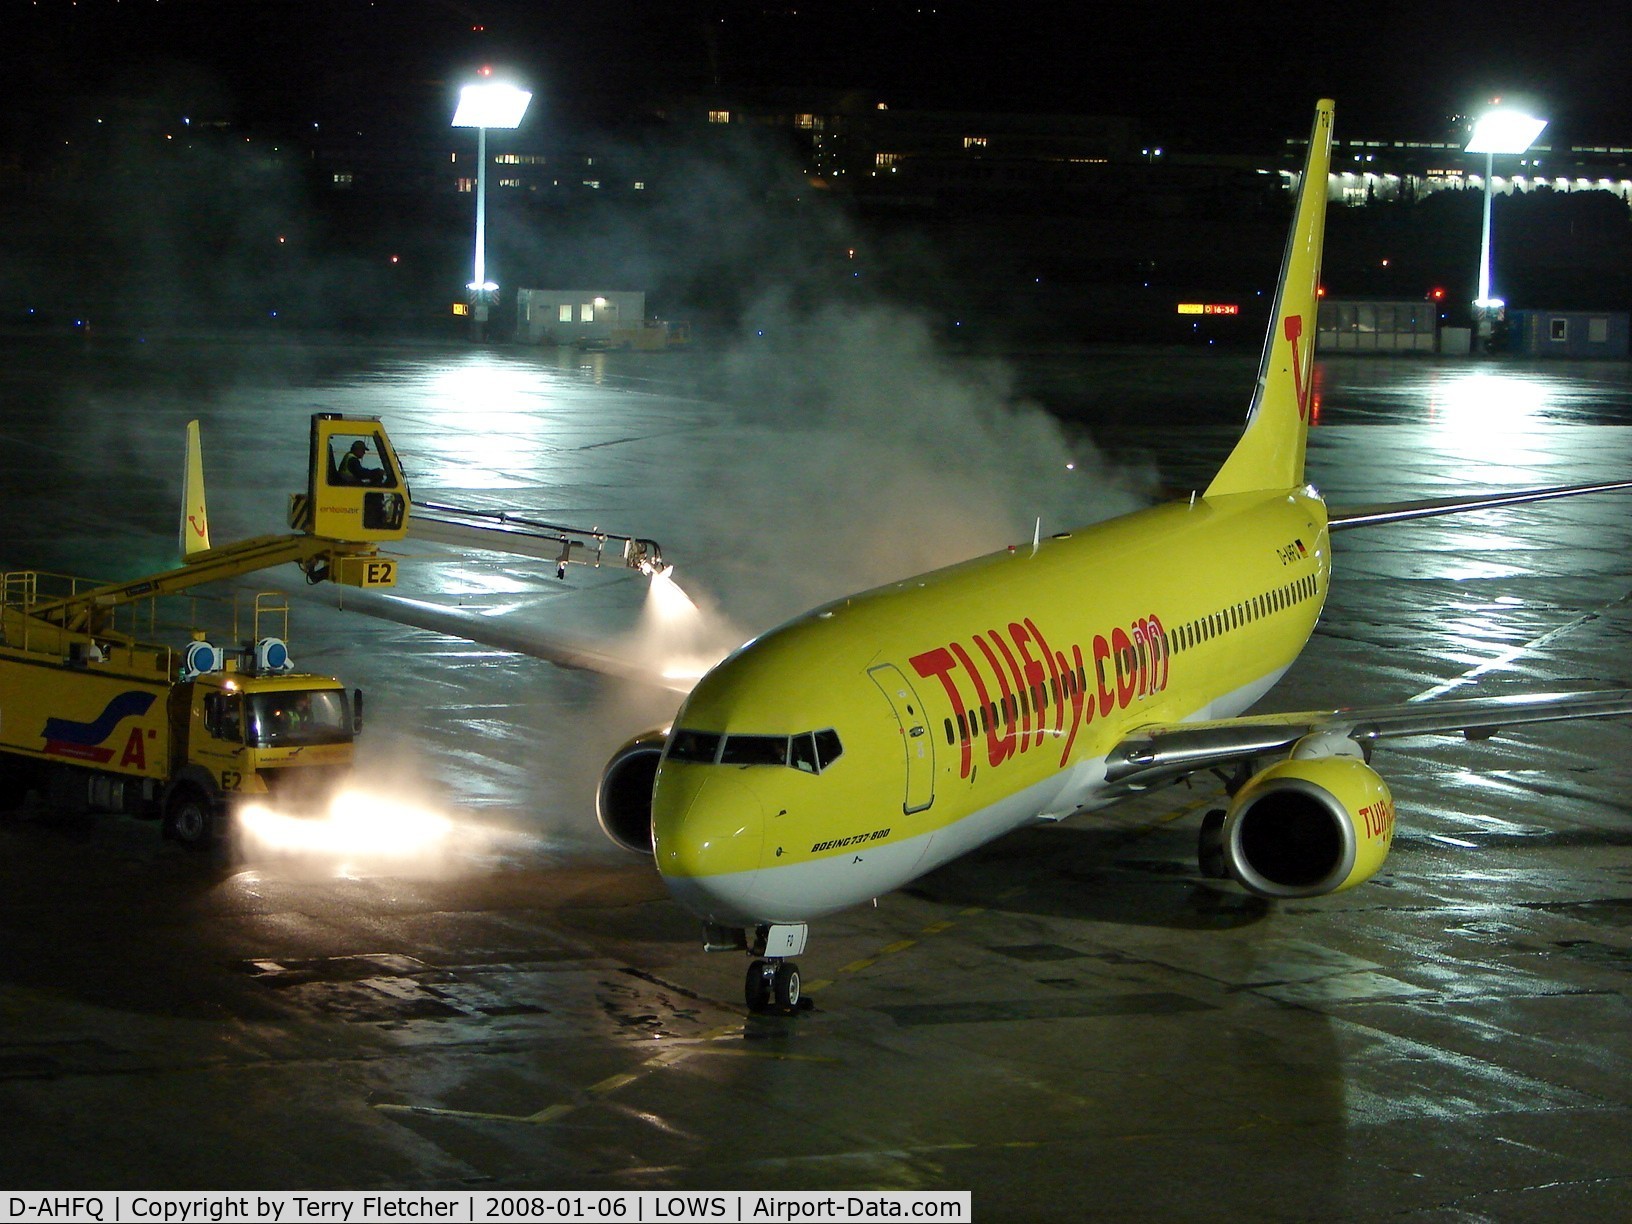 D-AHFQ, 2000 Boeing 737-8K5 C/N 27992, Hapag 737 gets the full de-ice treatment before its last rotation of the day